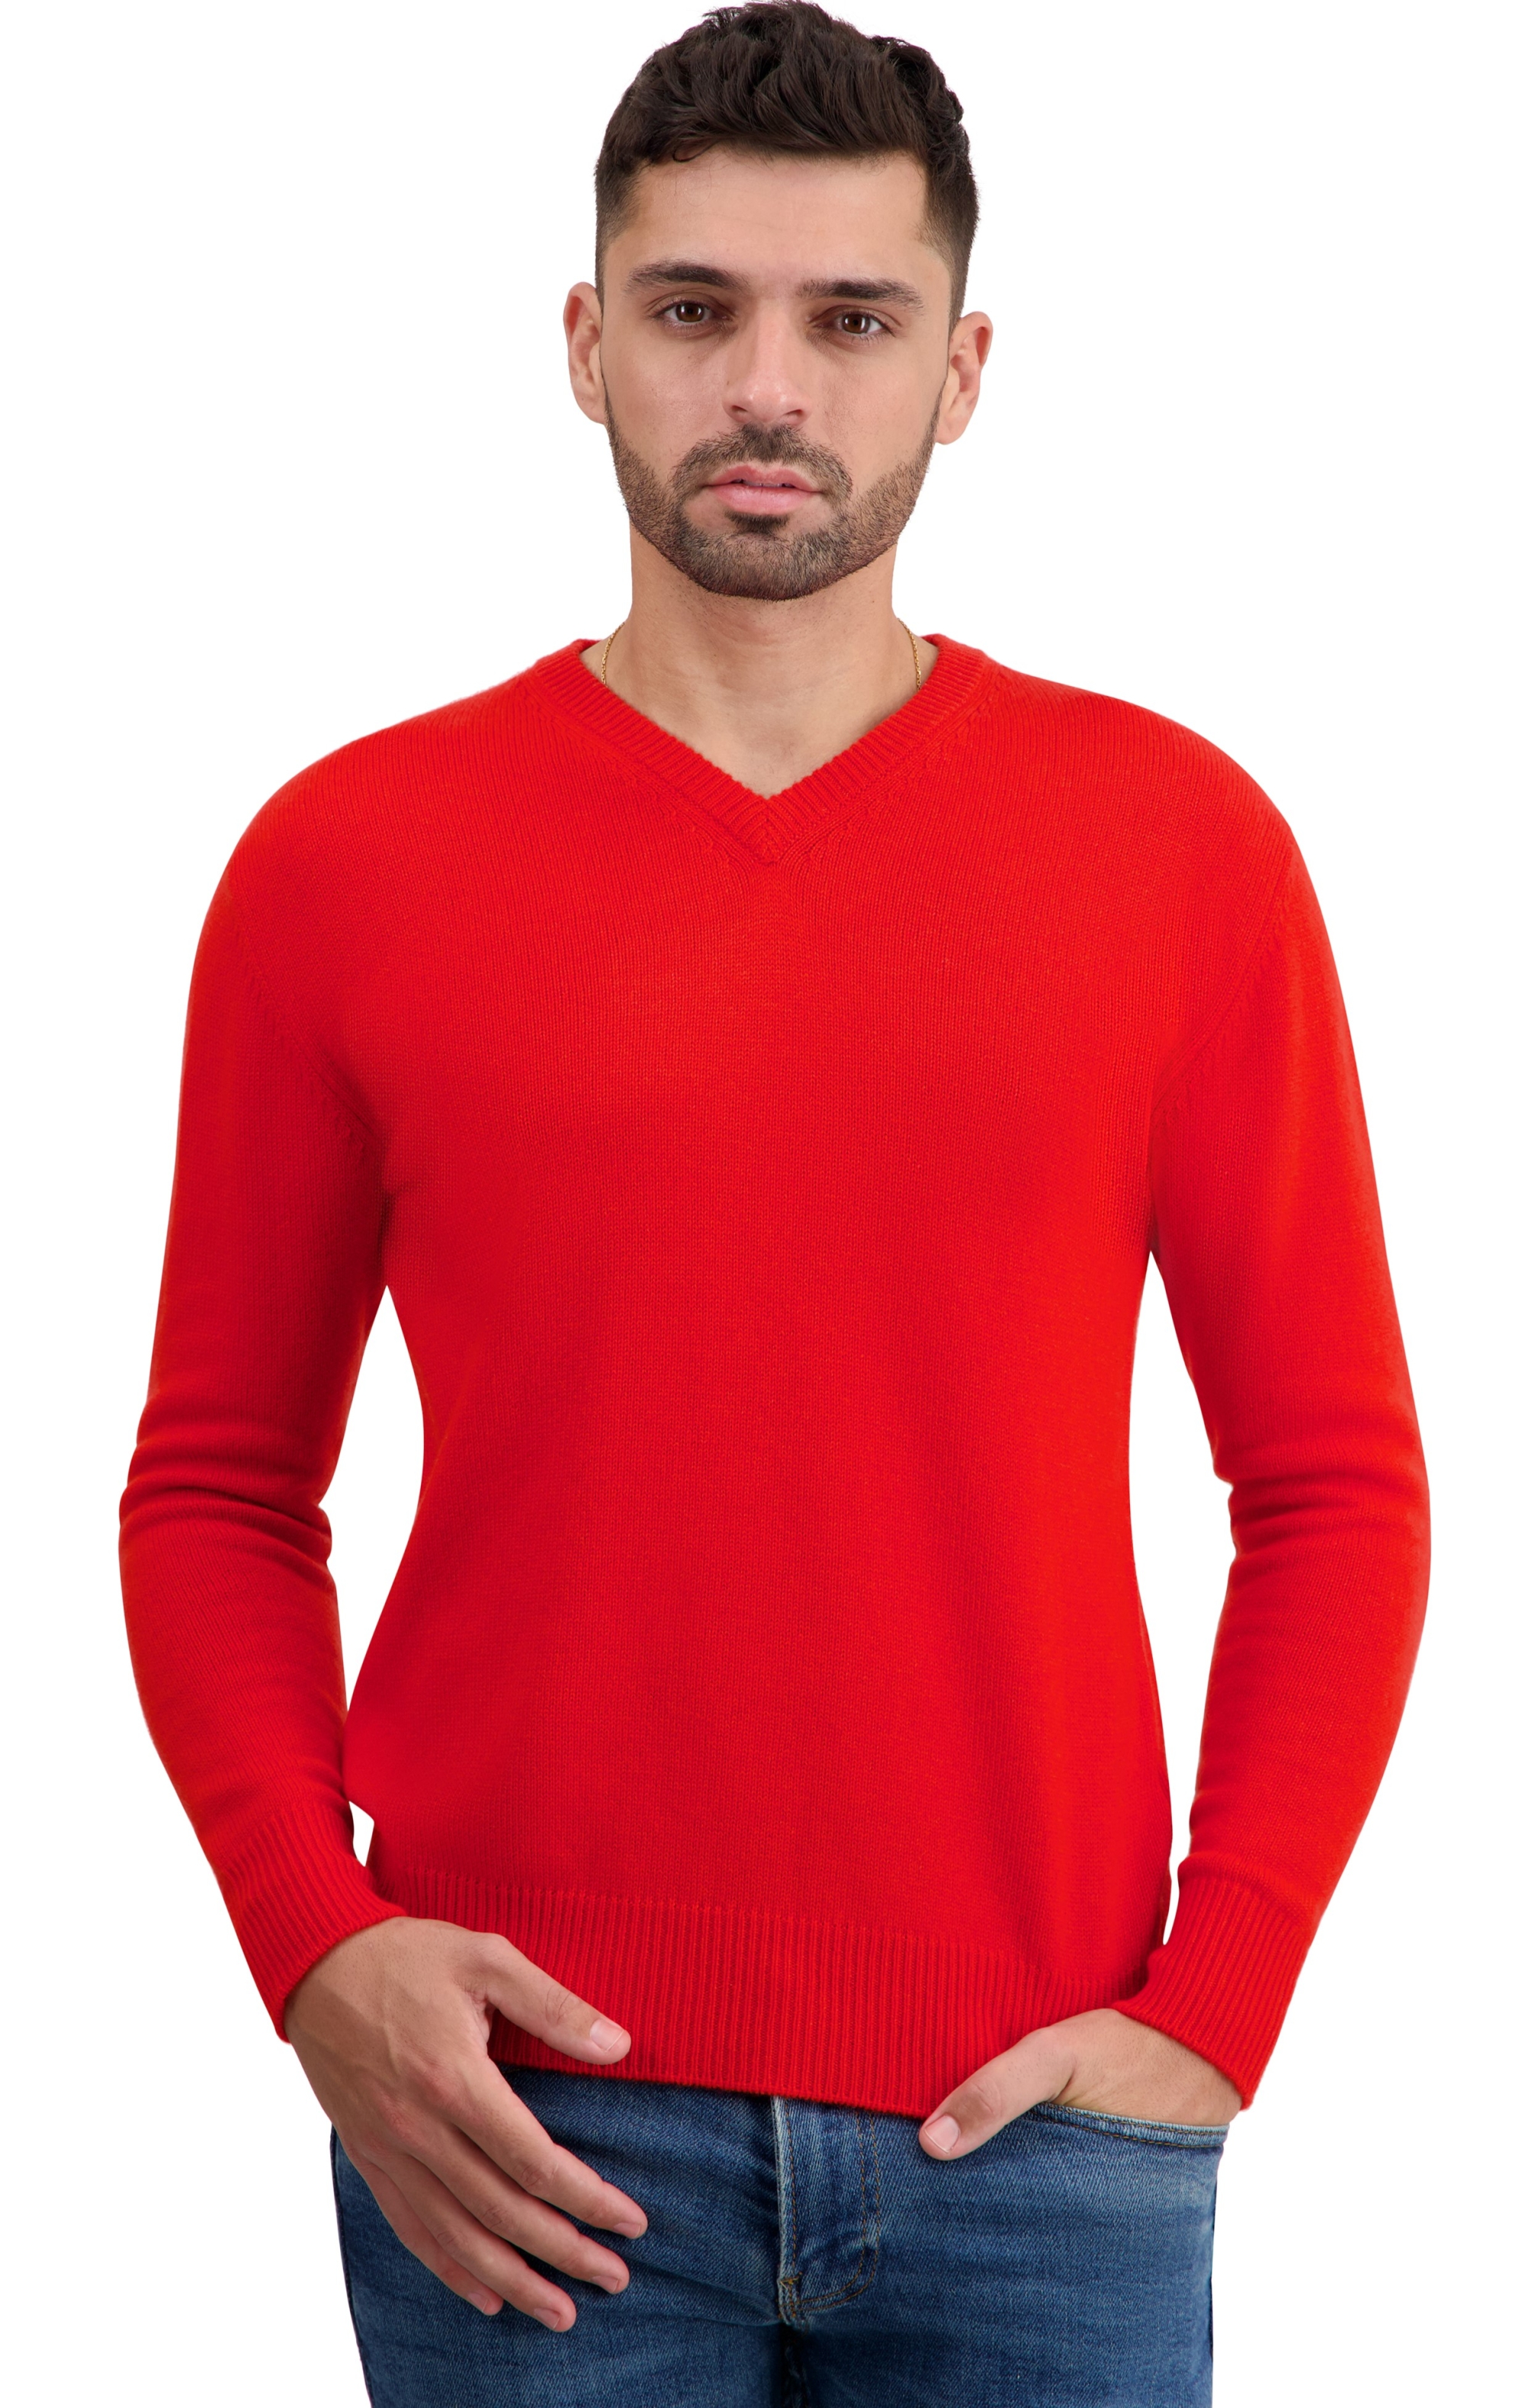 Cashmere men basic sweaters at low prices tour first tomato 2xl